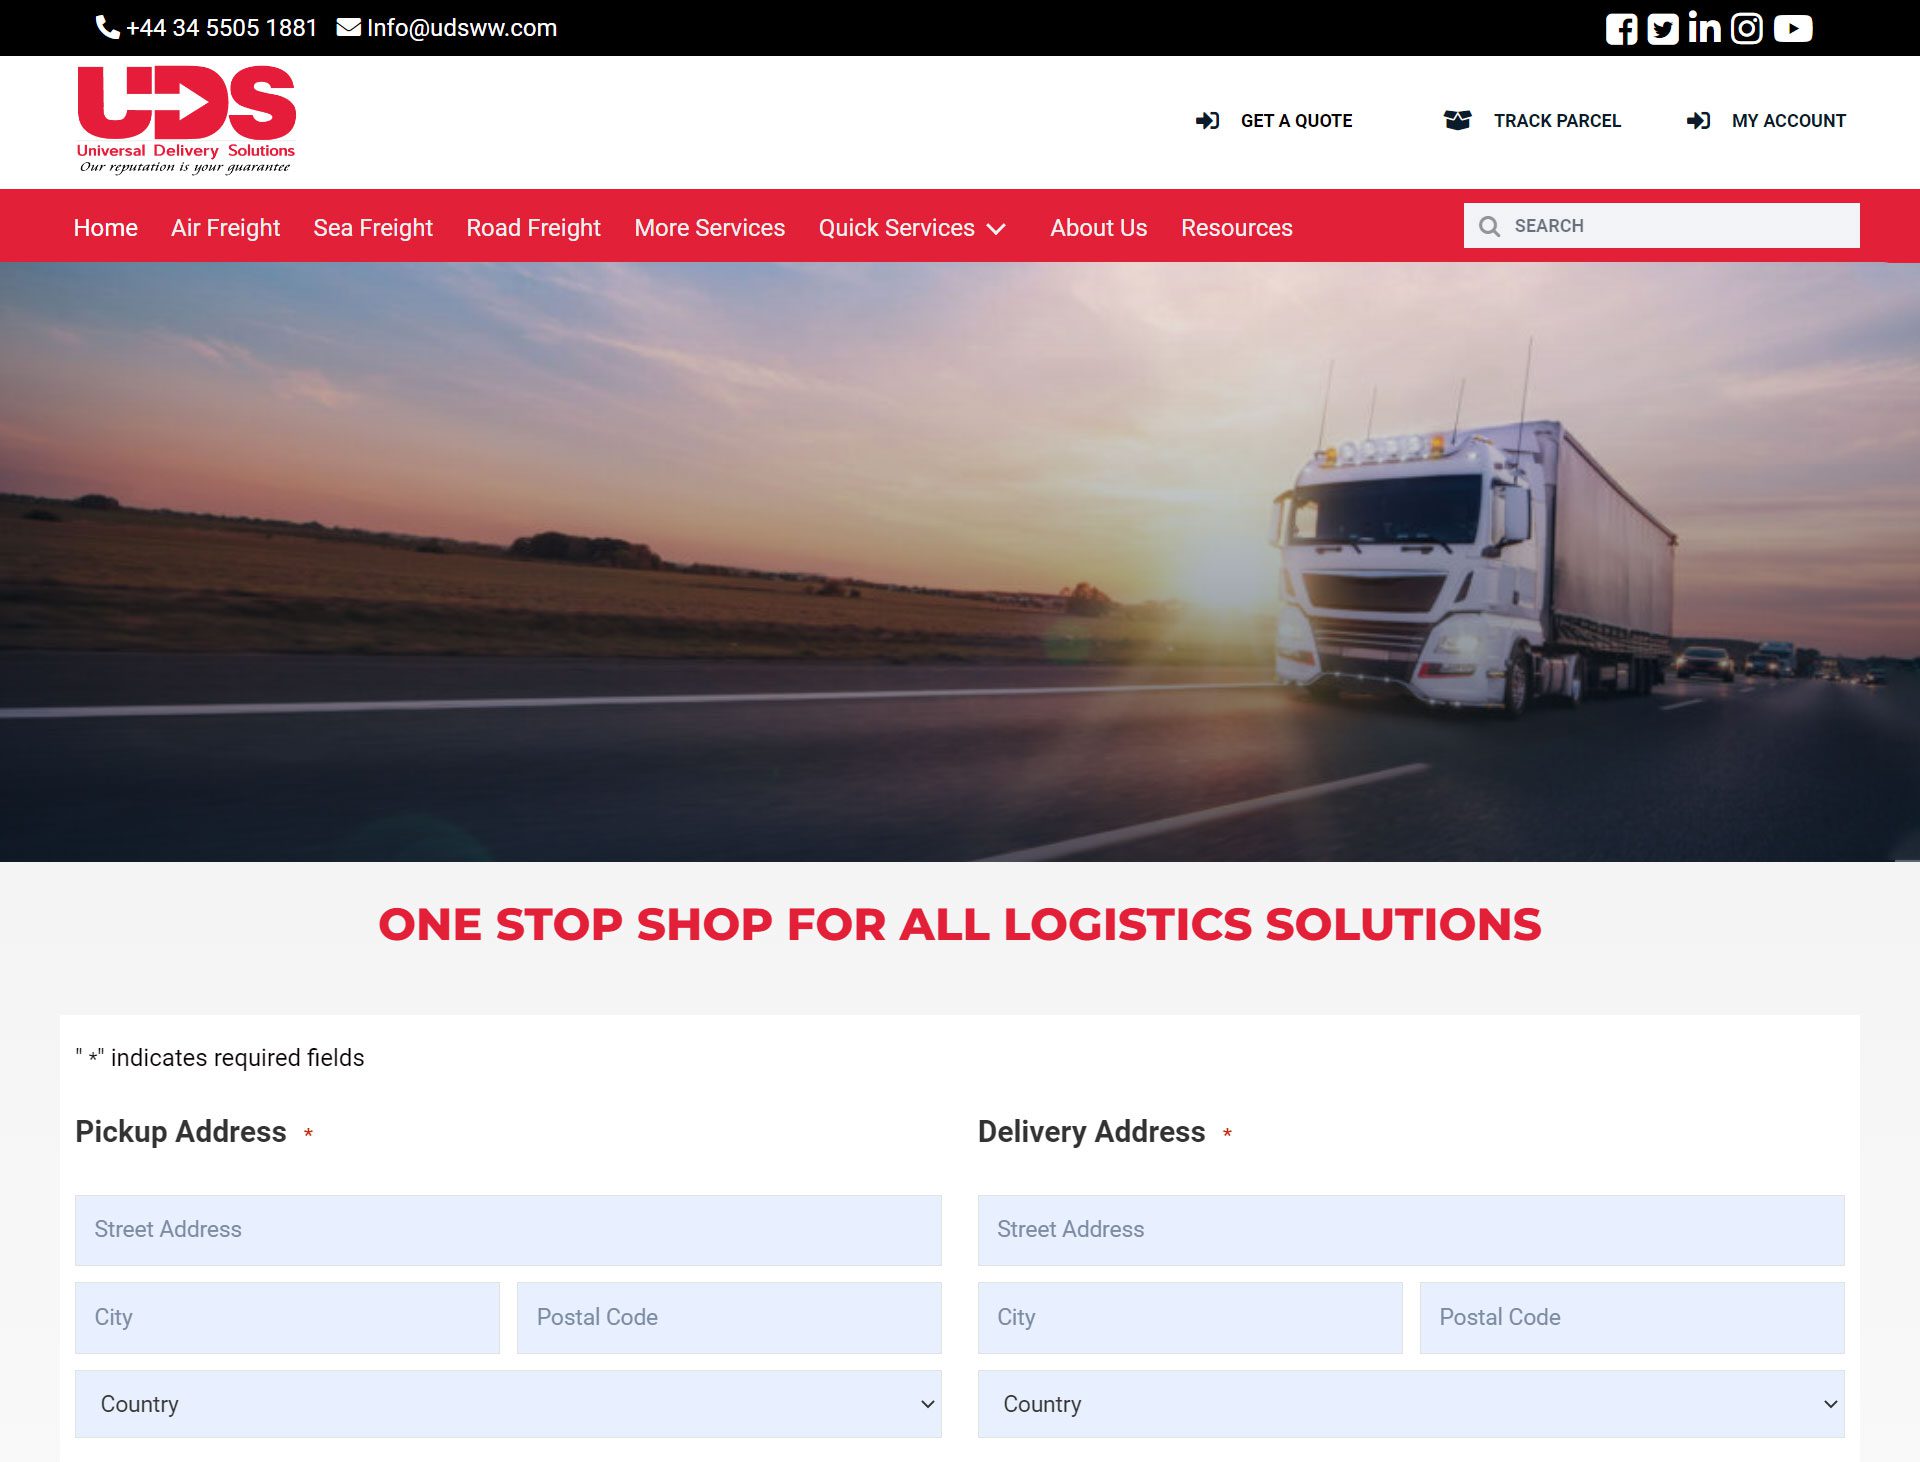 Universal-Delivery-Solutions-Ltd-Homepage-featued